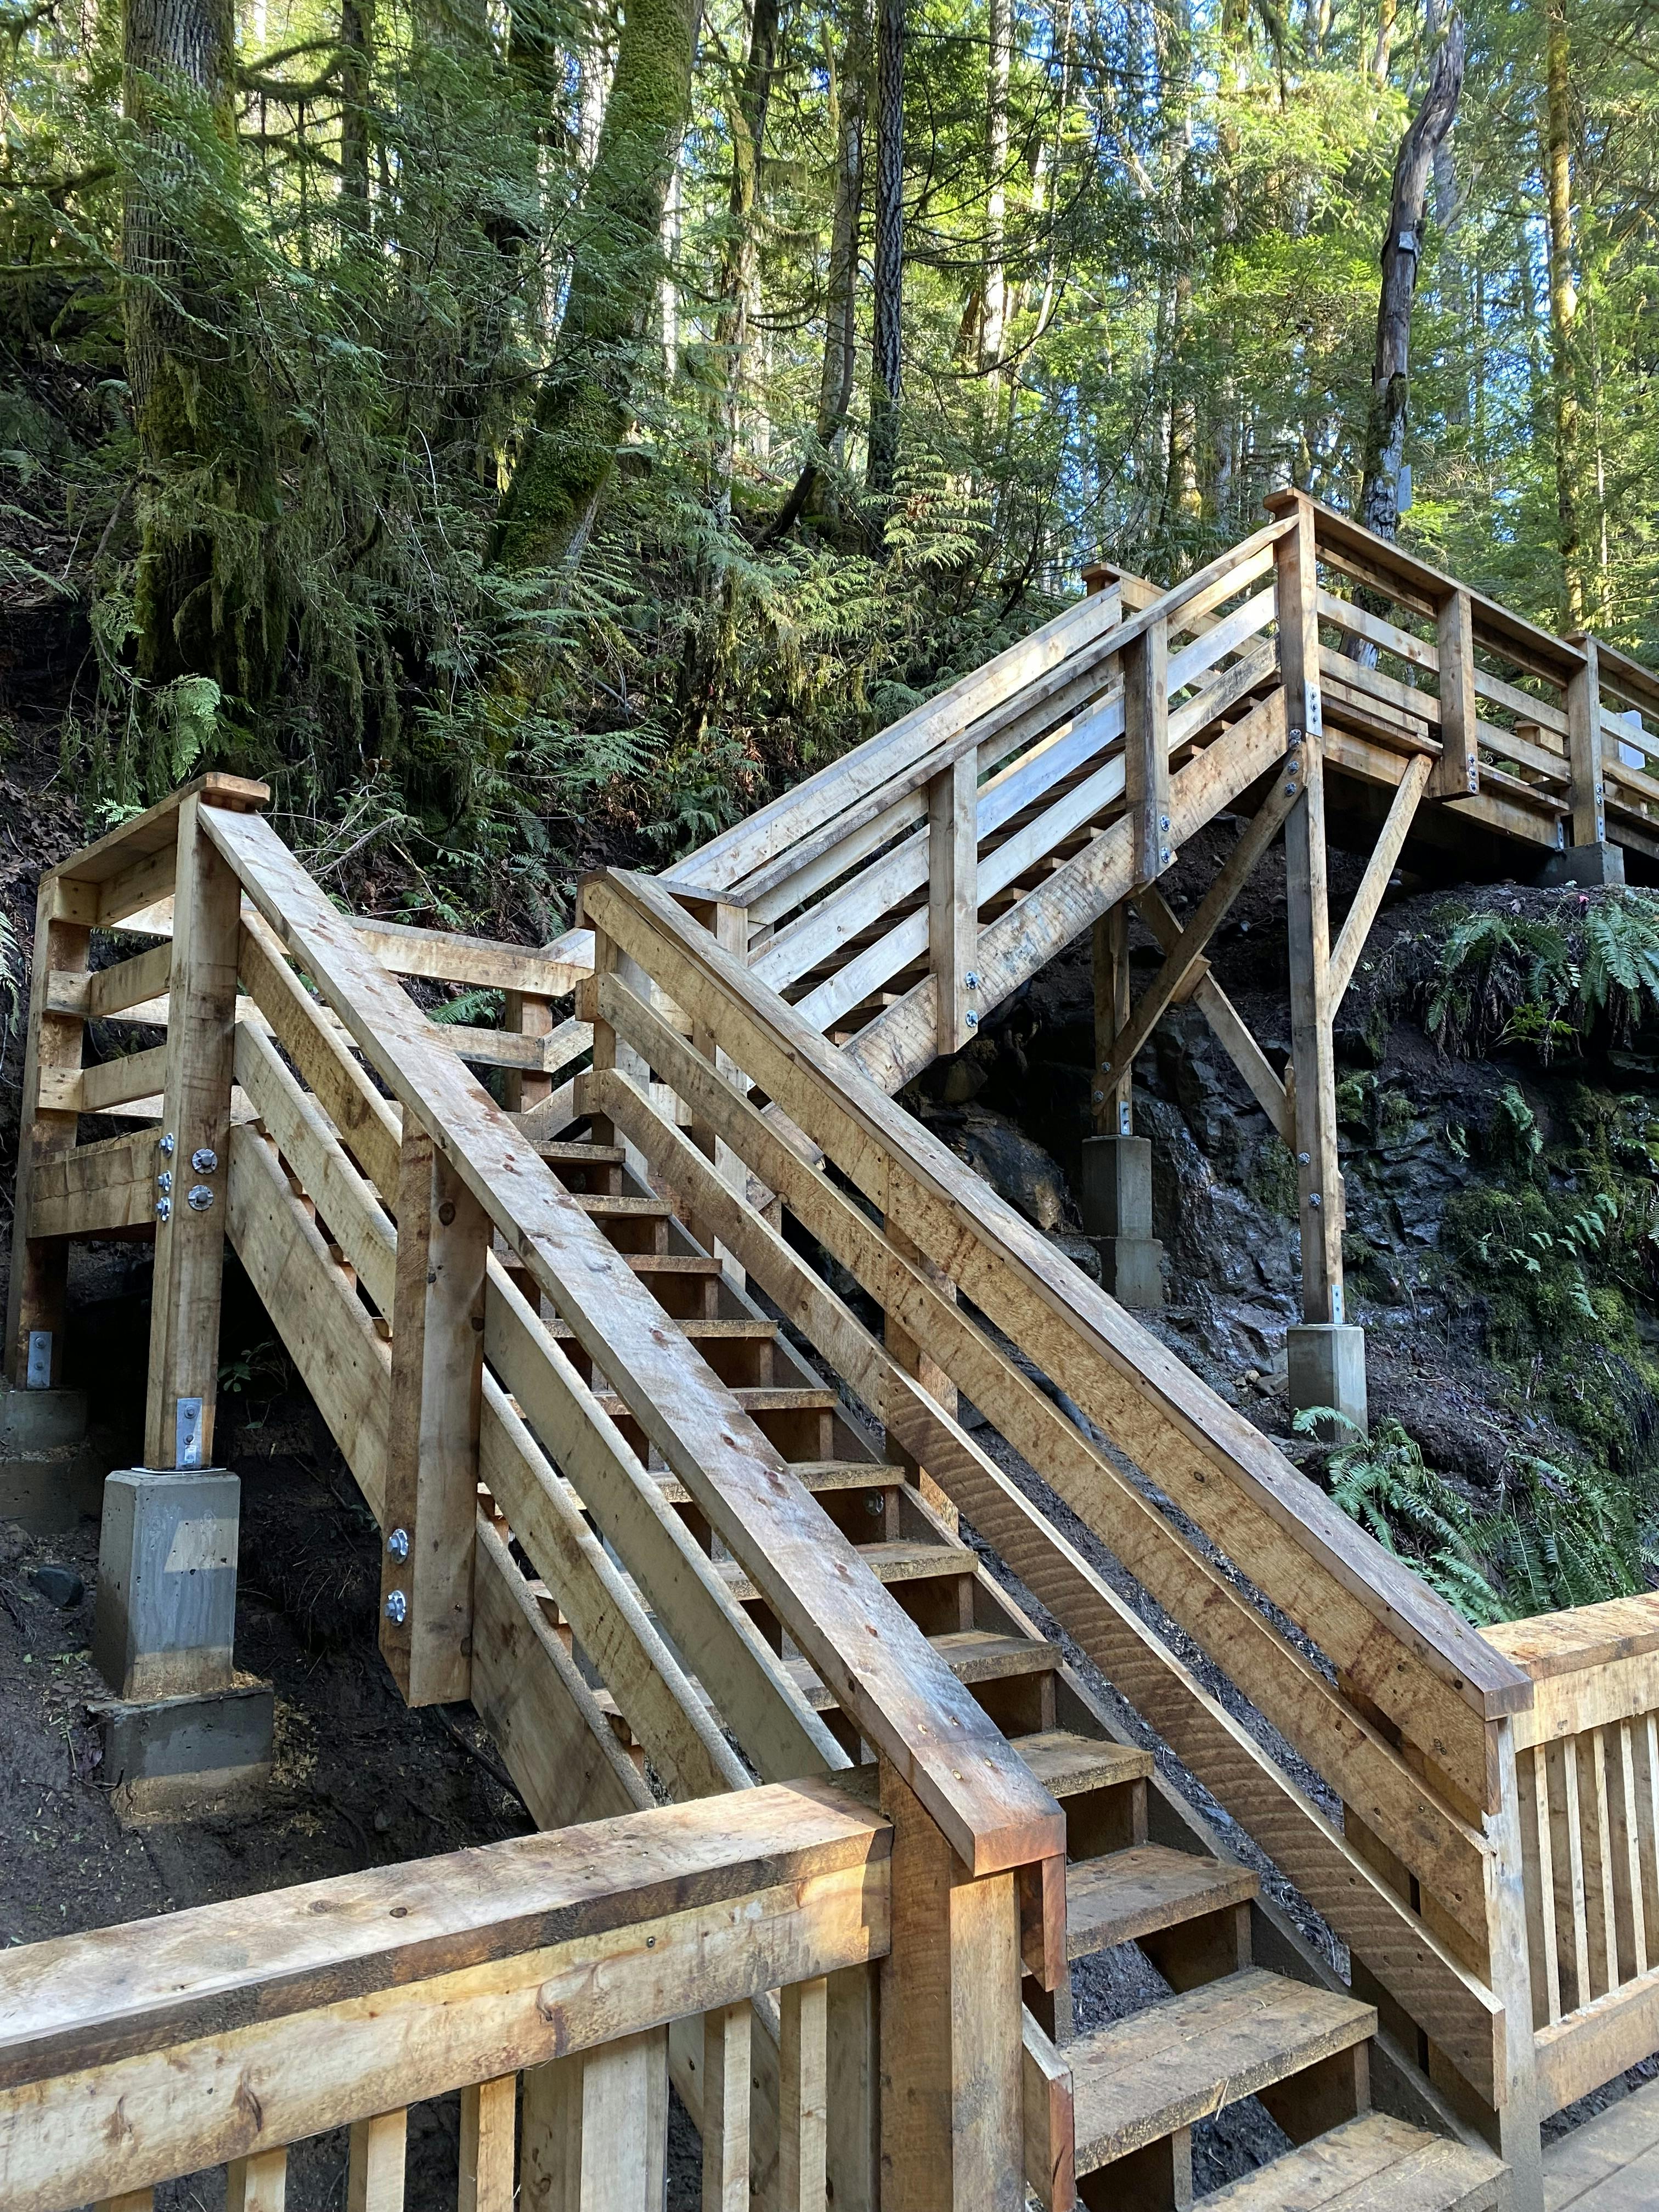 Benson Creek Falls Regional Park Stairs from the Viewing Platform